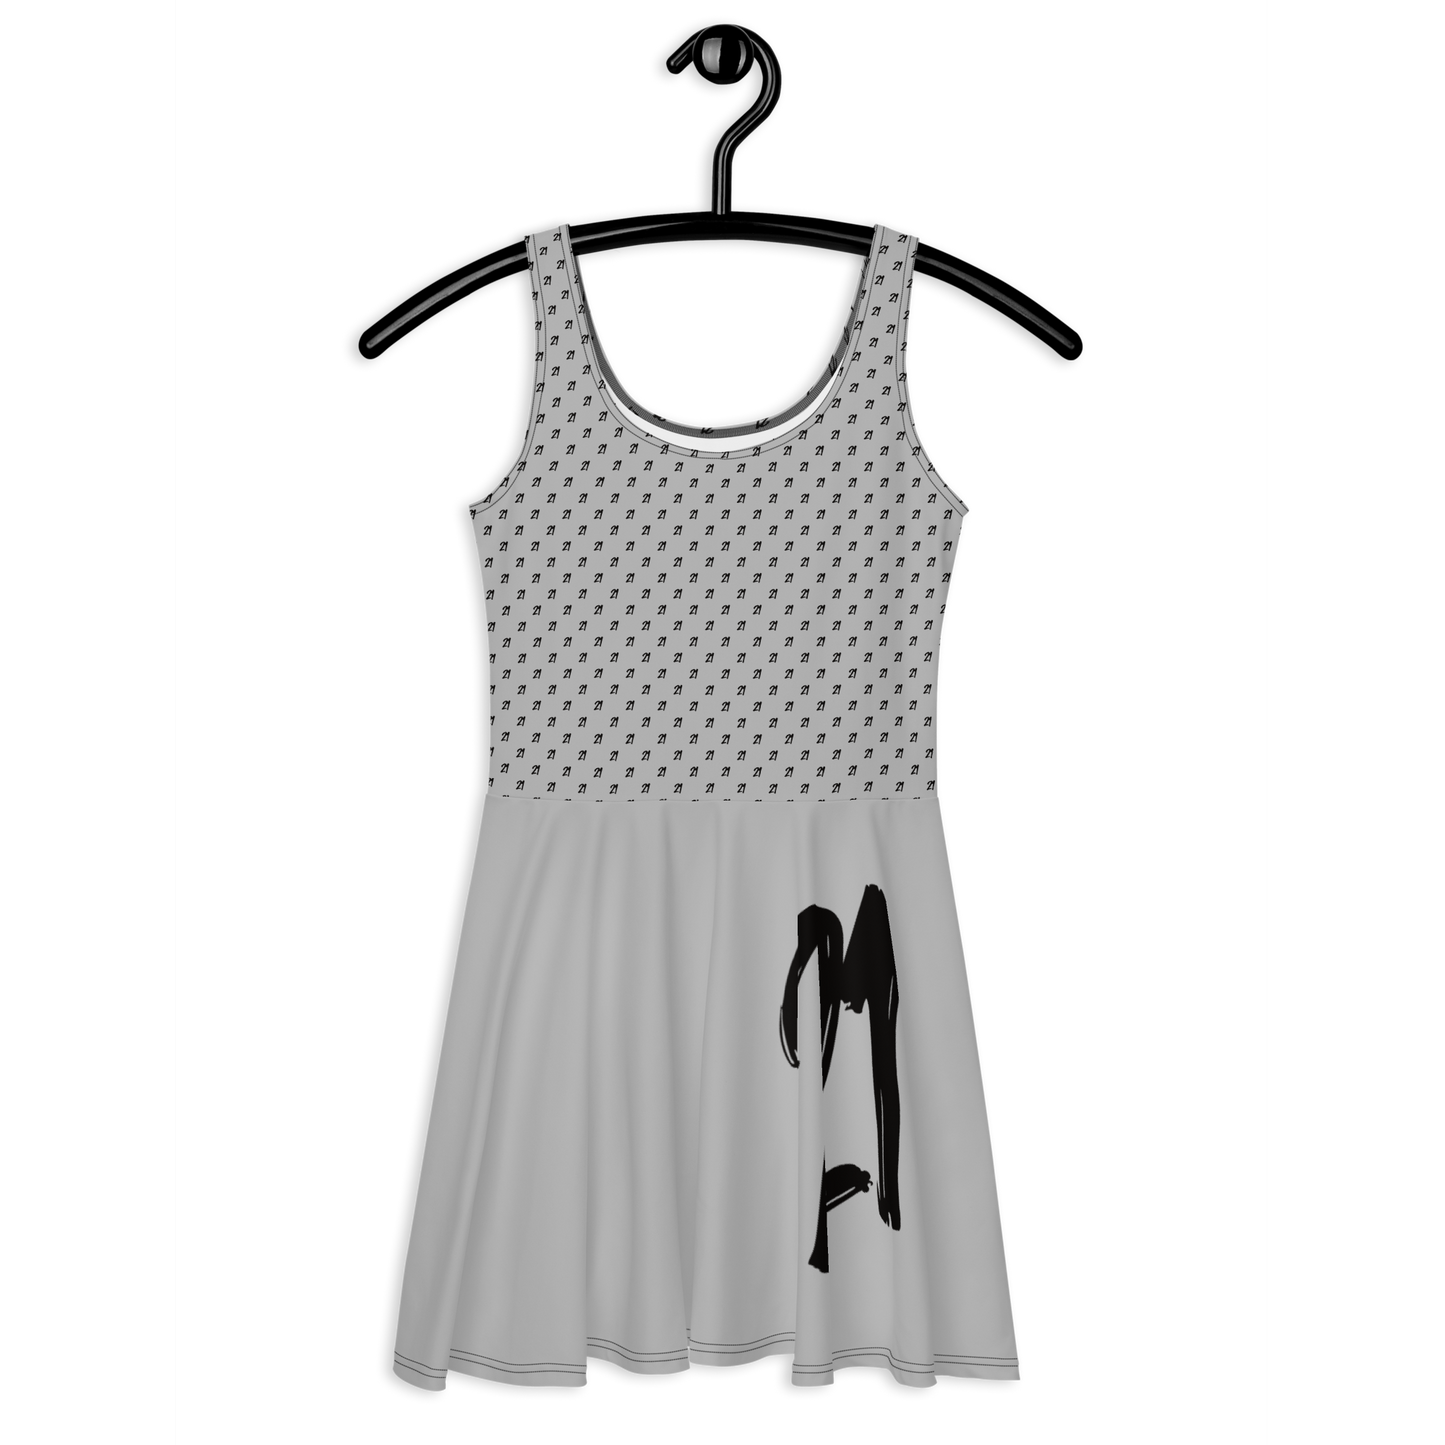 Front view of a silver bitcoin skater dress.